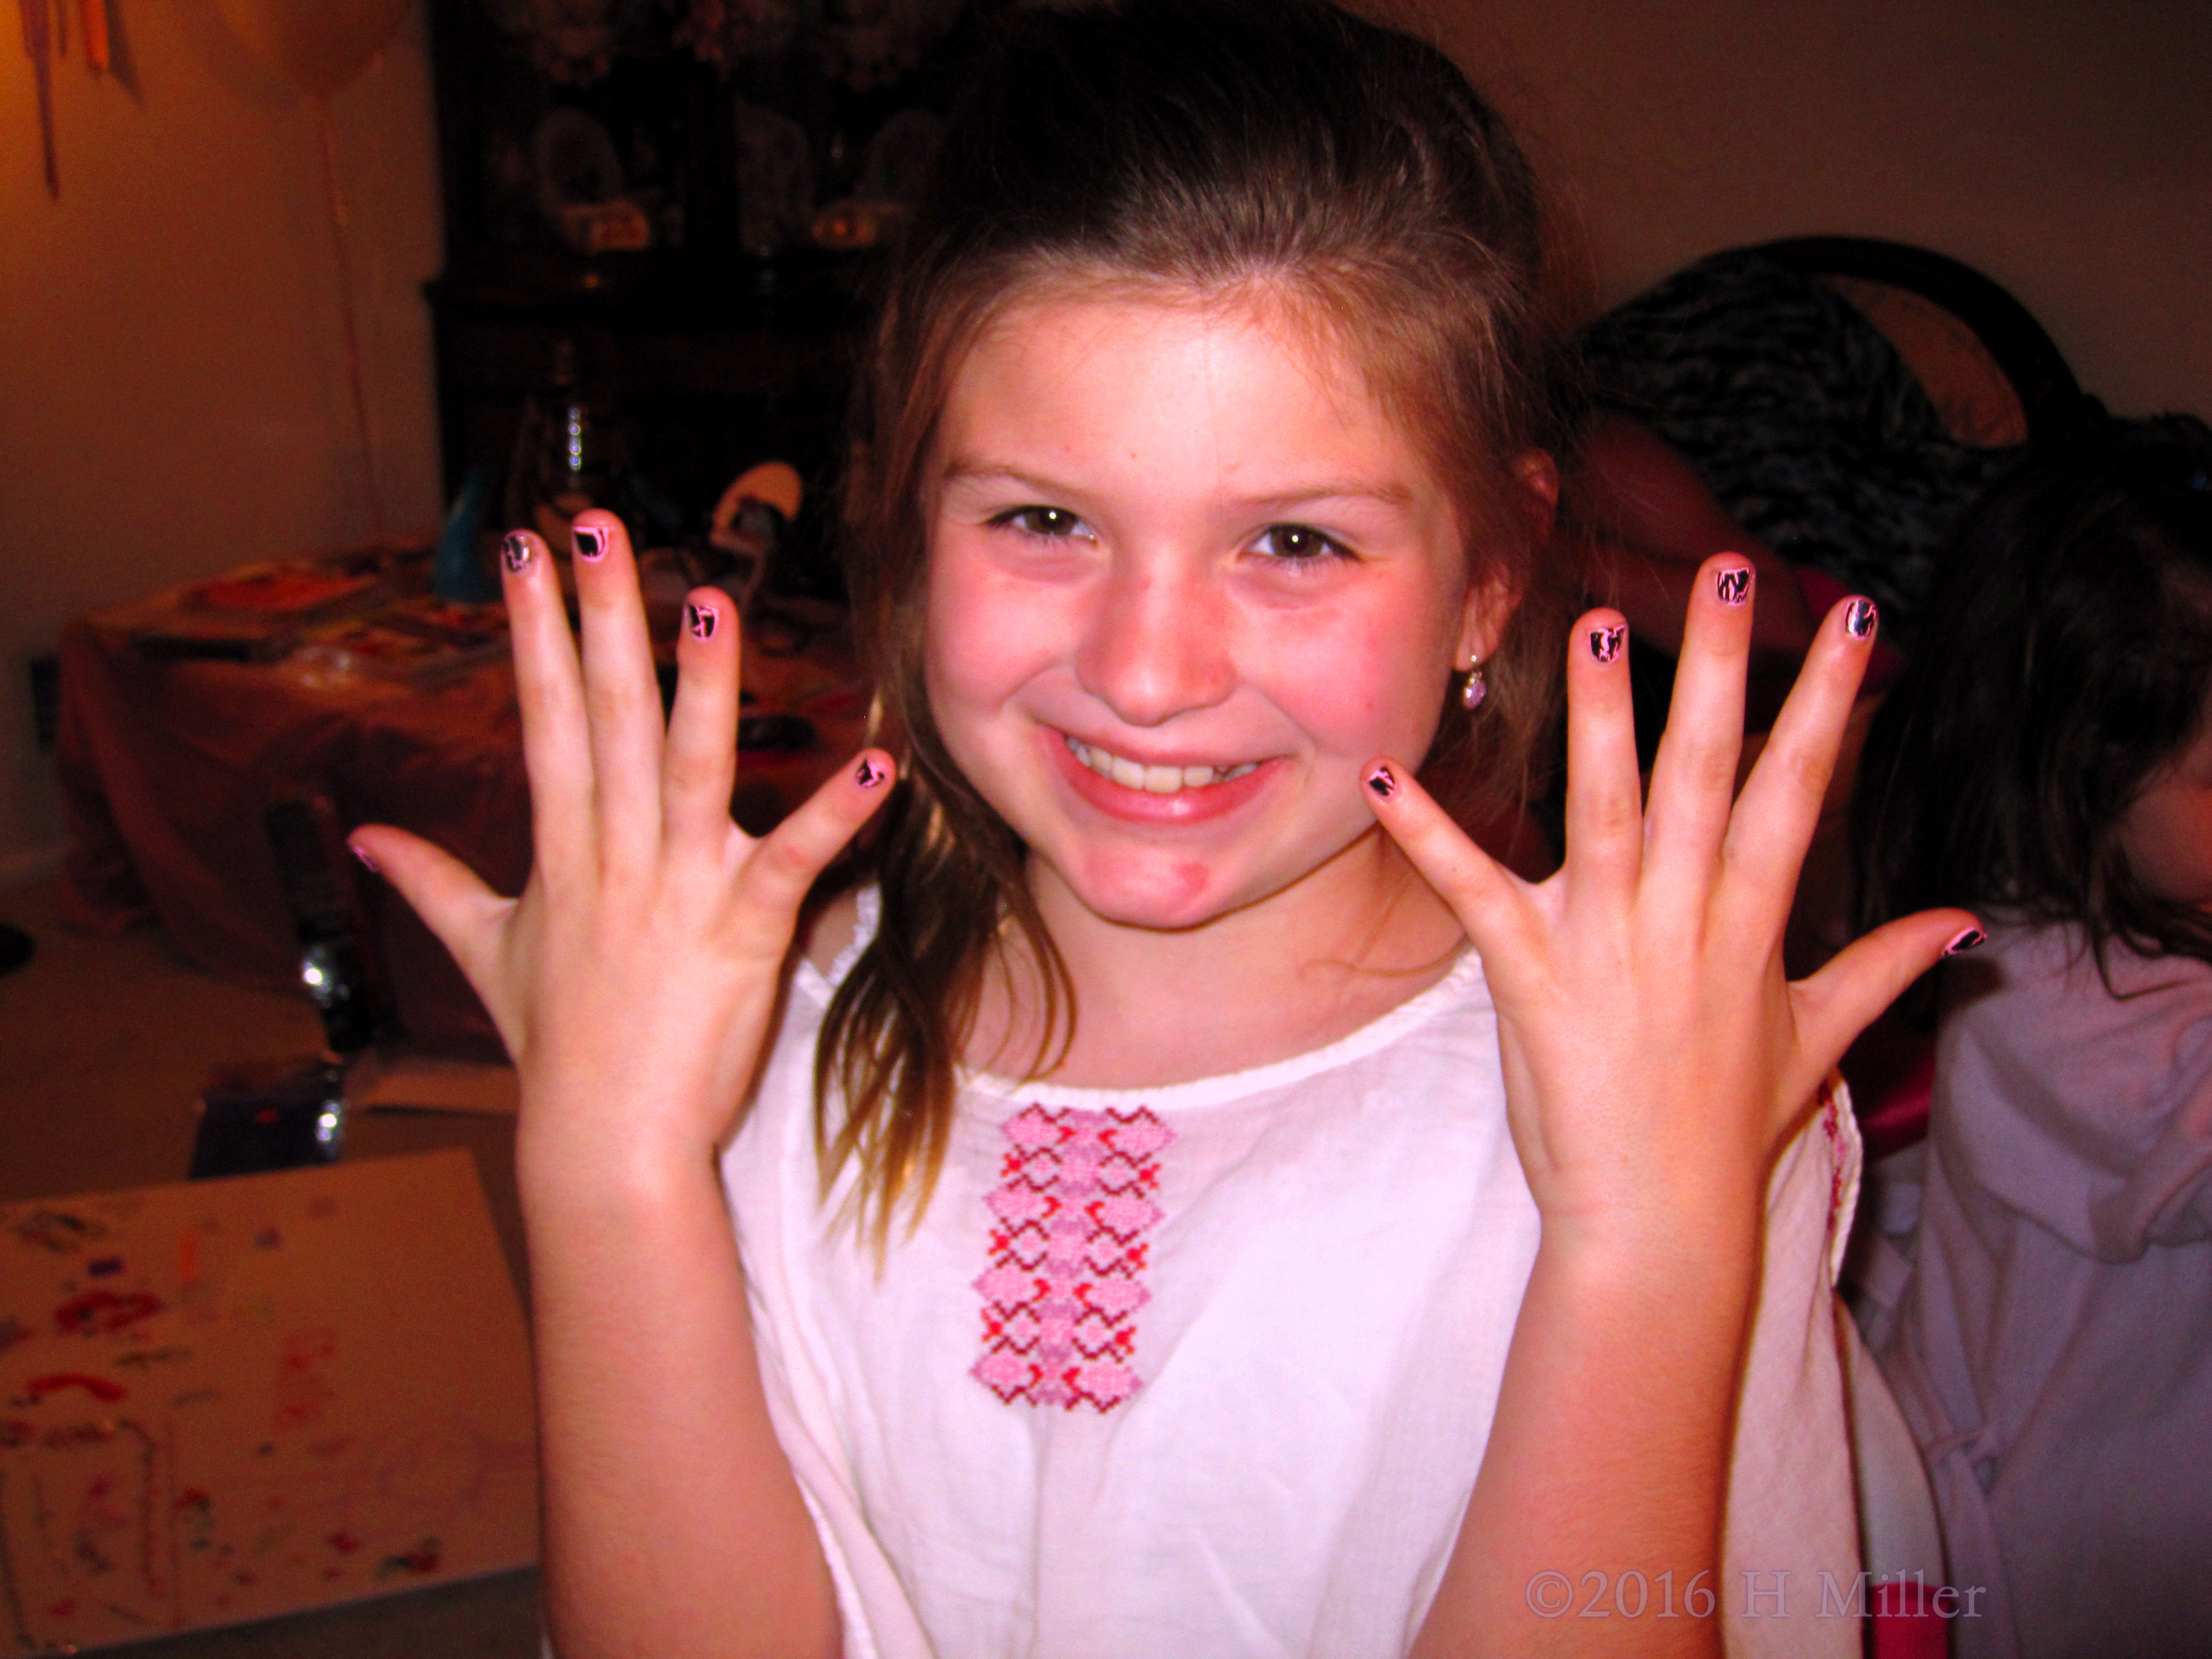 Smiling And Happy With Her Brand New Manicure For Girls!